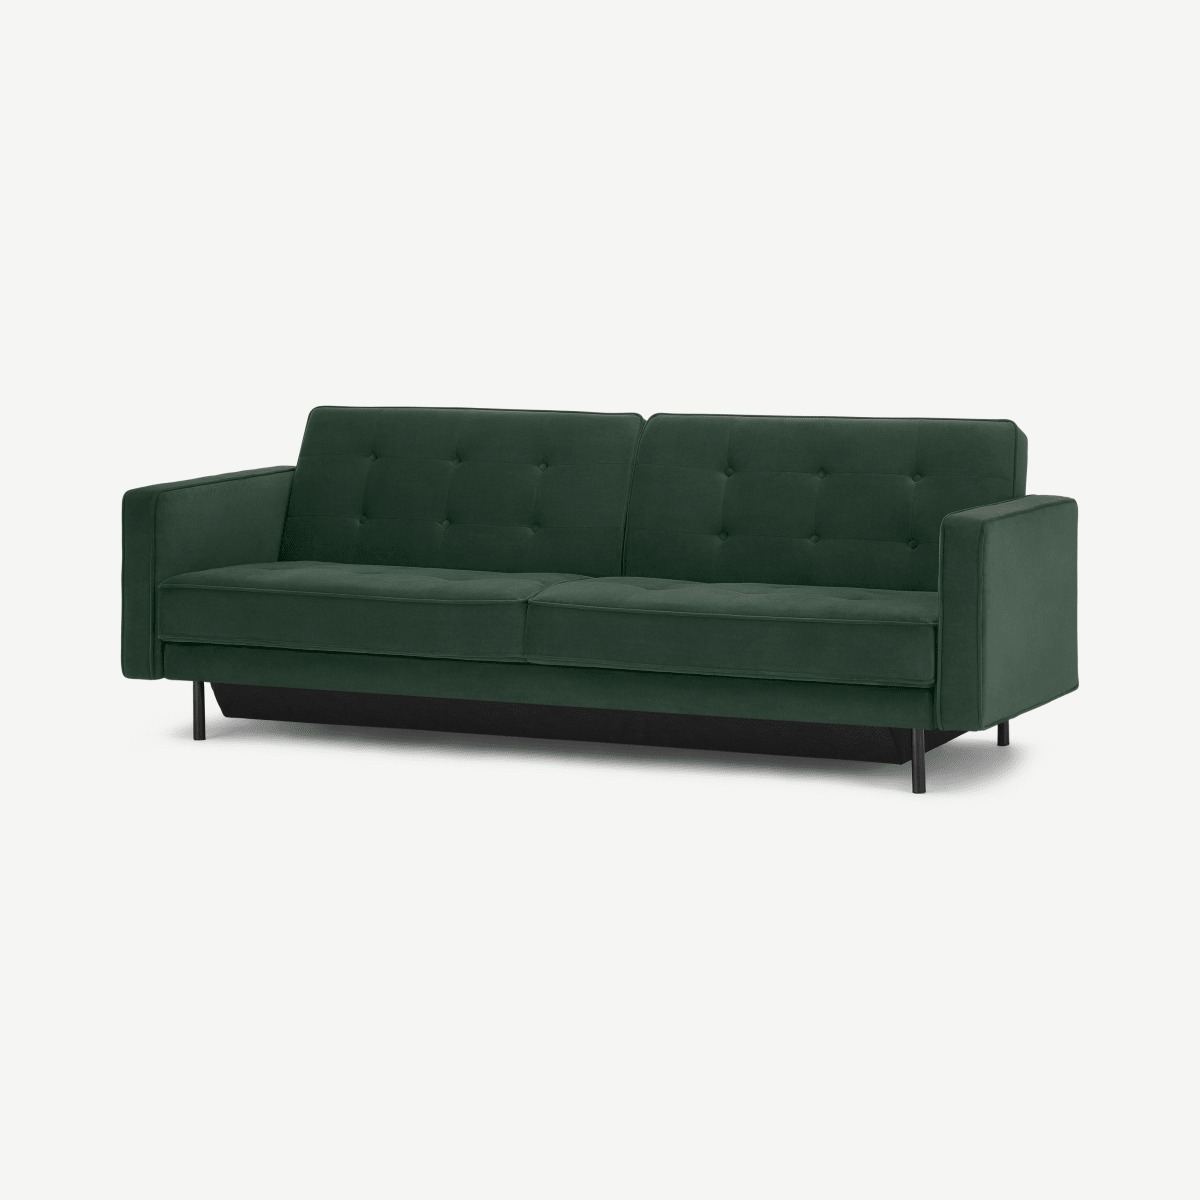 Rosslyn Click Clack Sofa Bed with Storage, Autumn Green Velvet